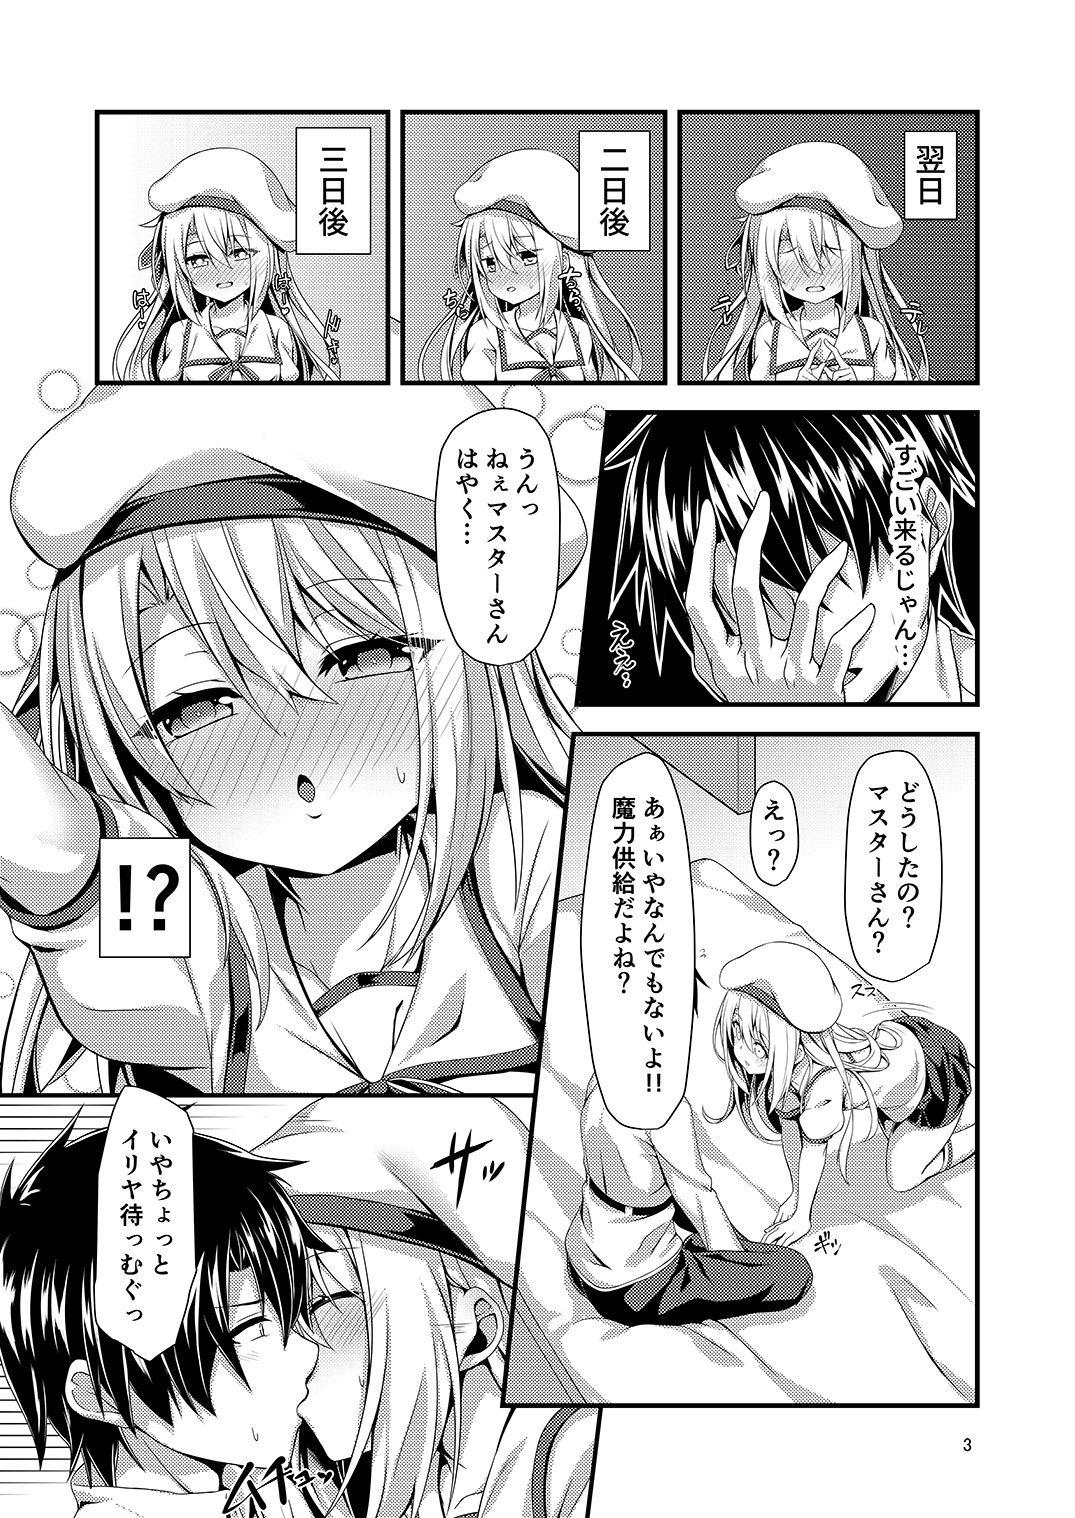 Creampies Ama Love Illya - Fate grand order Fate kaleid liner prisma illya Condom - Page 5